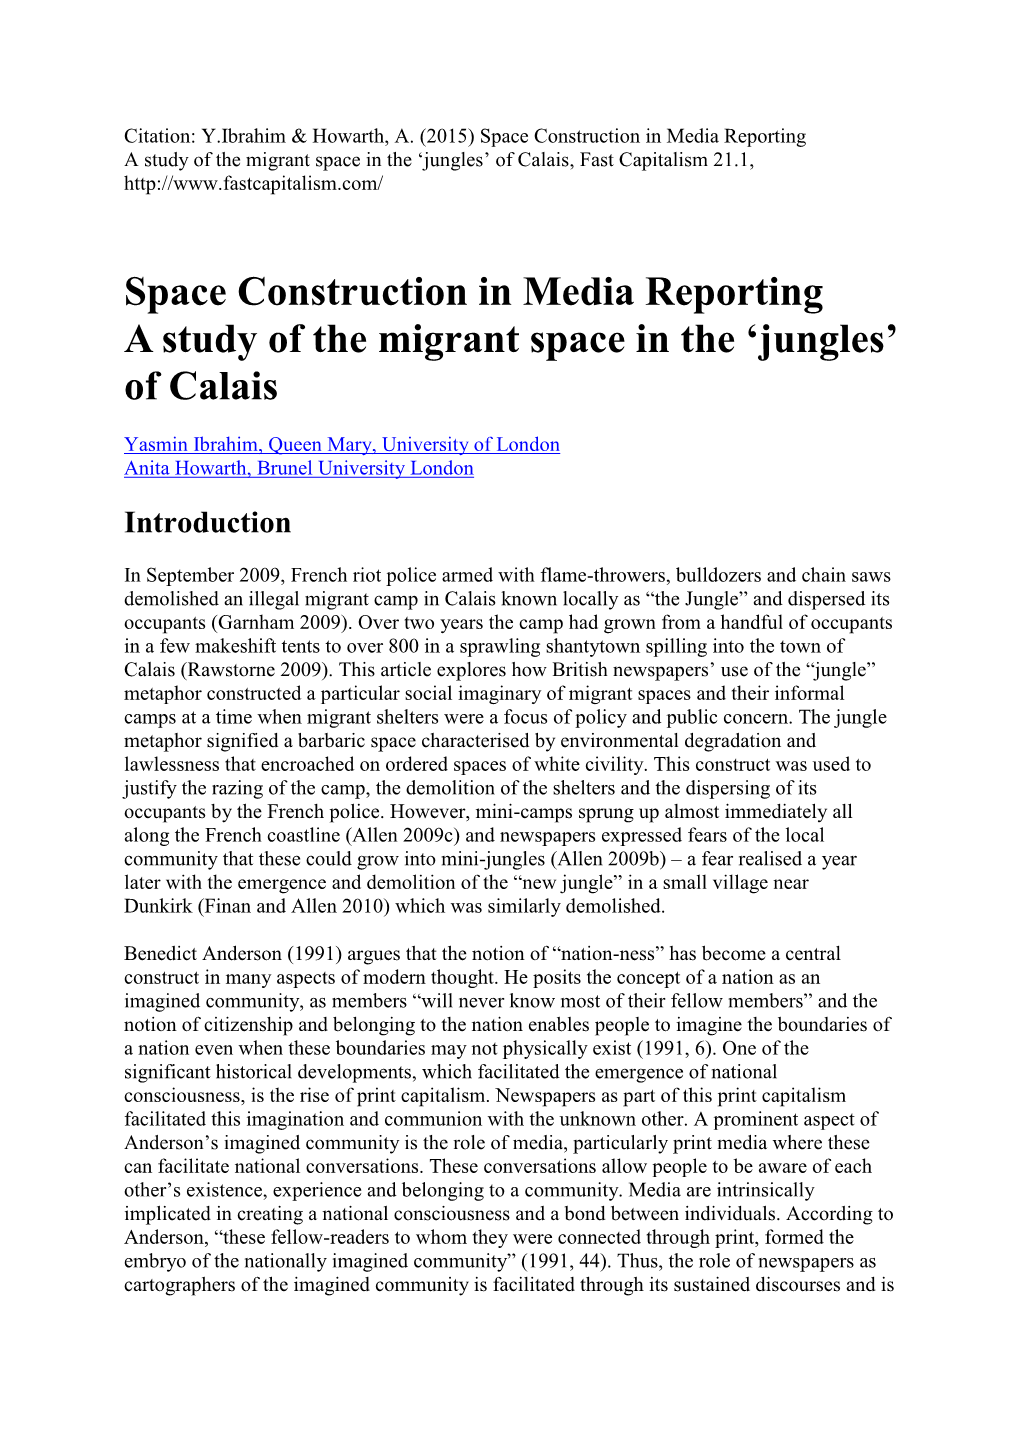 Space Construction in Media Reporting a Study of the Migrant Space in the „Jungles‟ of Calais, Fast Capitalism 21.1